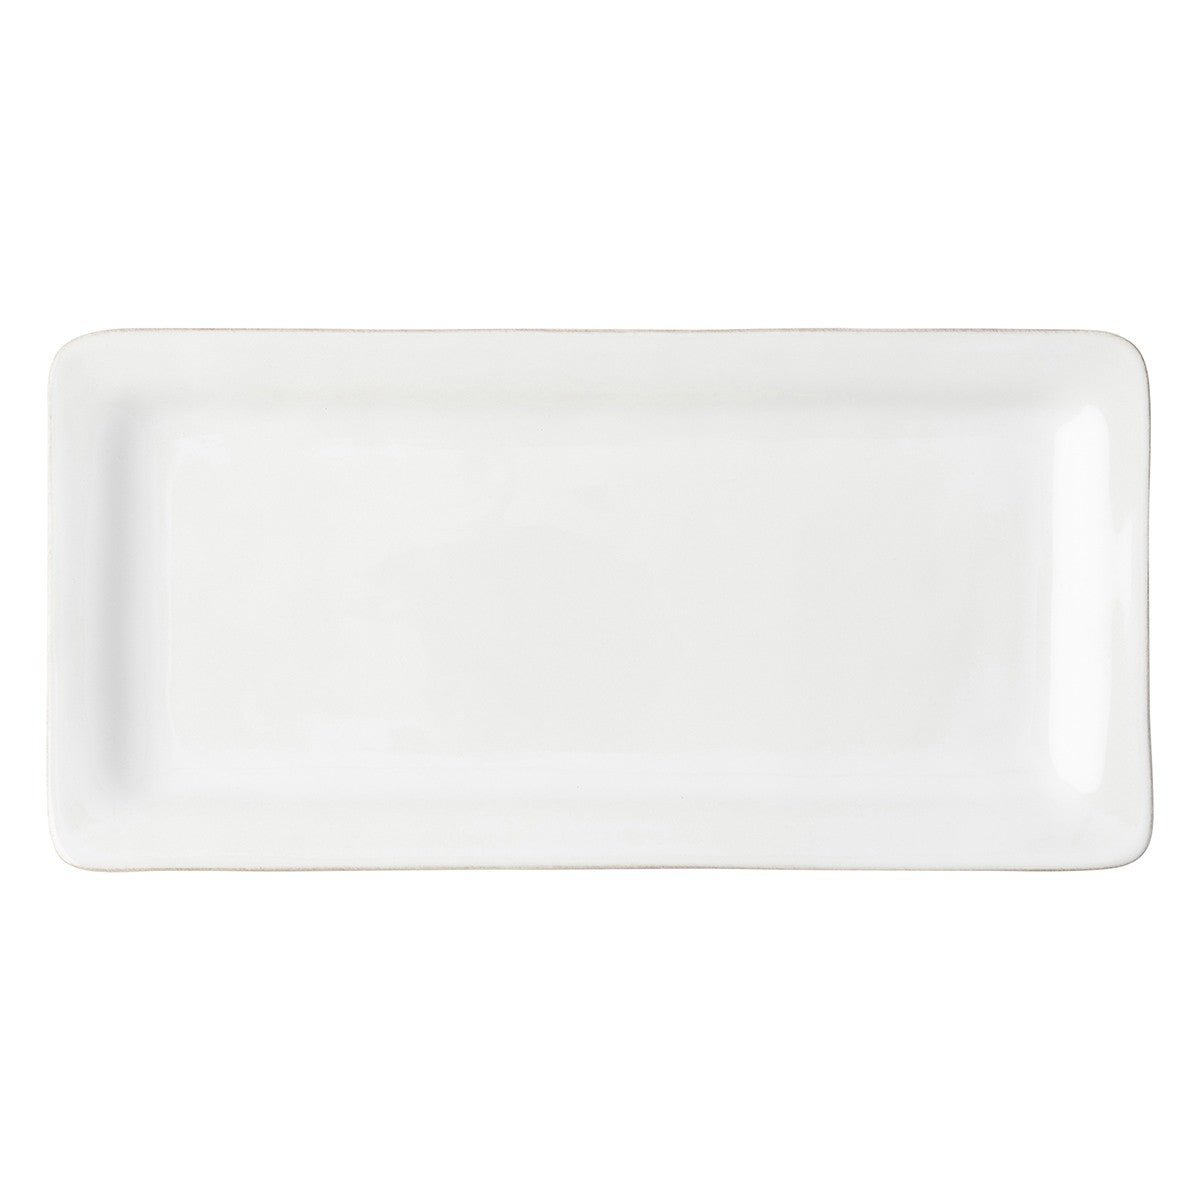 View Juliska - Puro Appetizer and Serving Tray